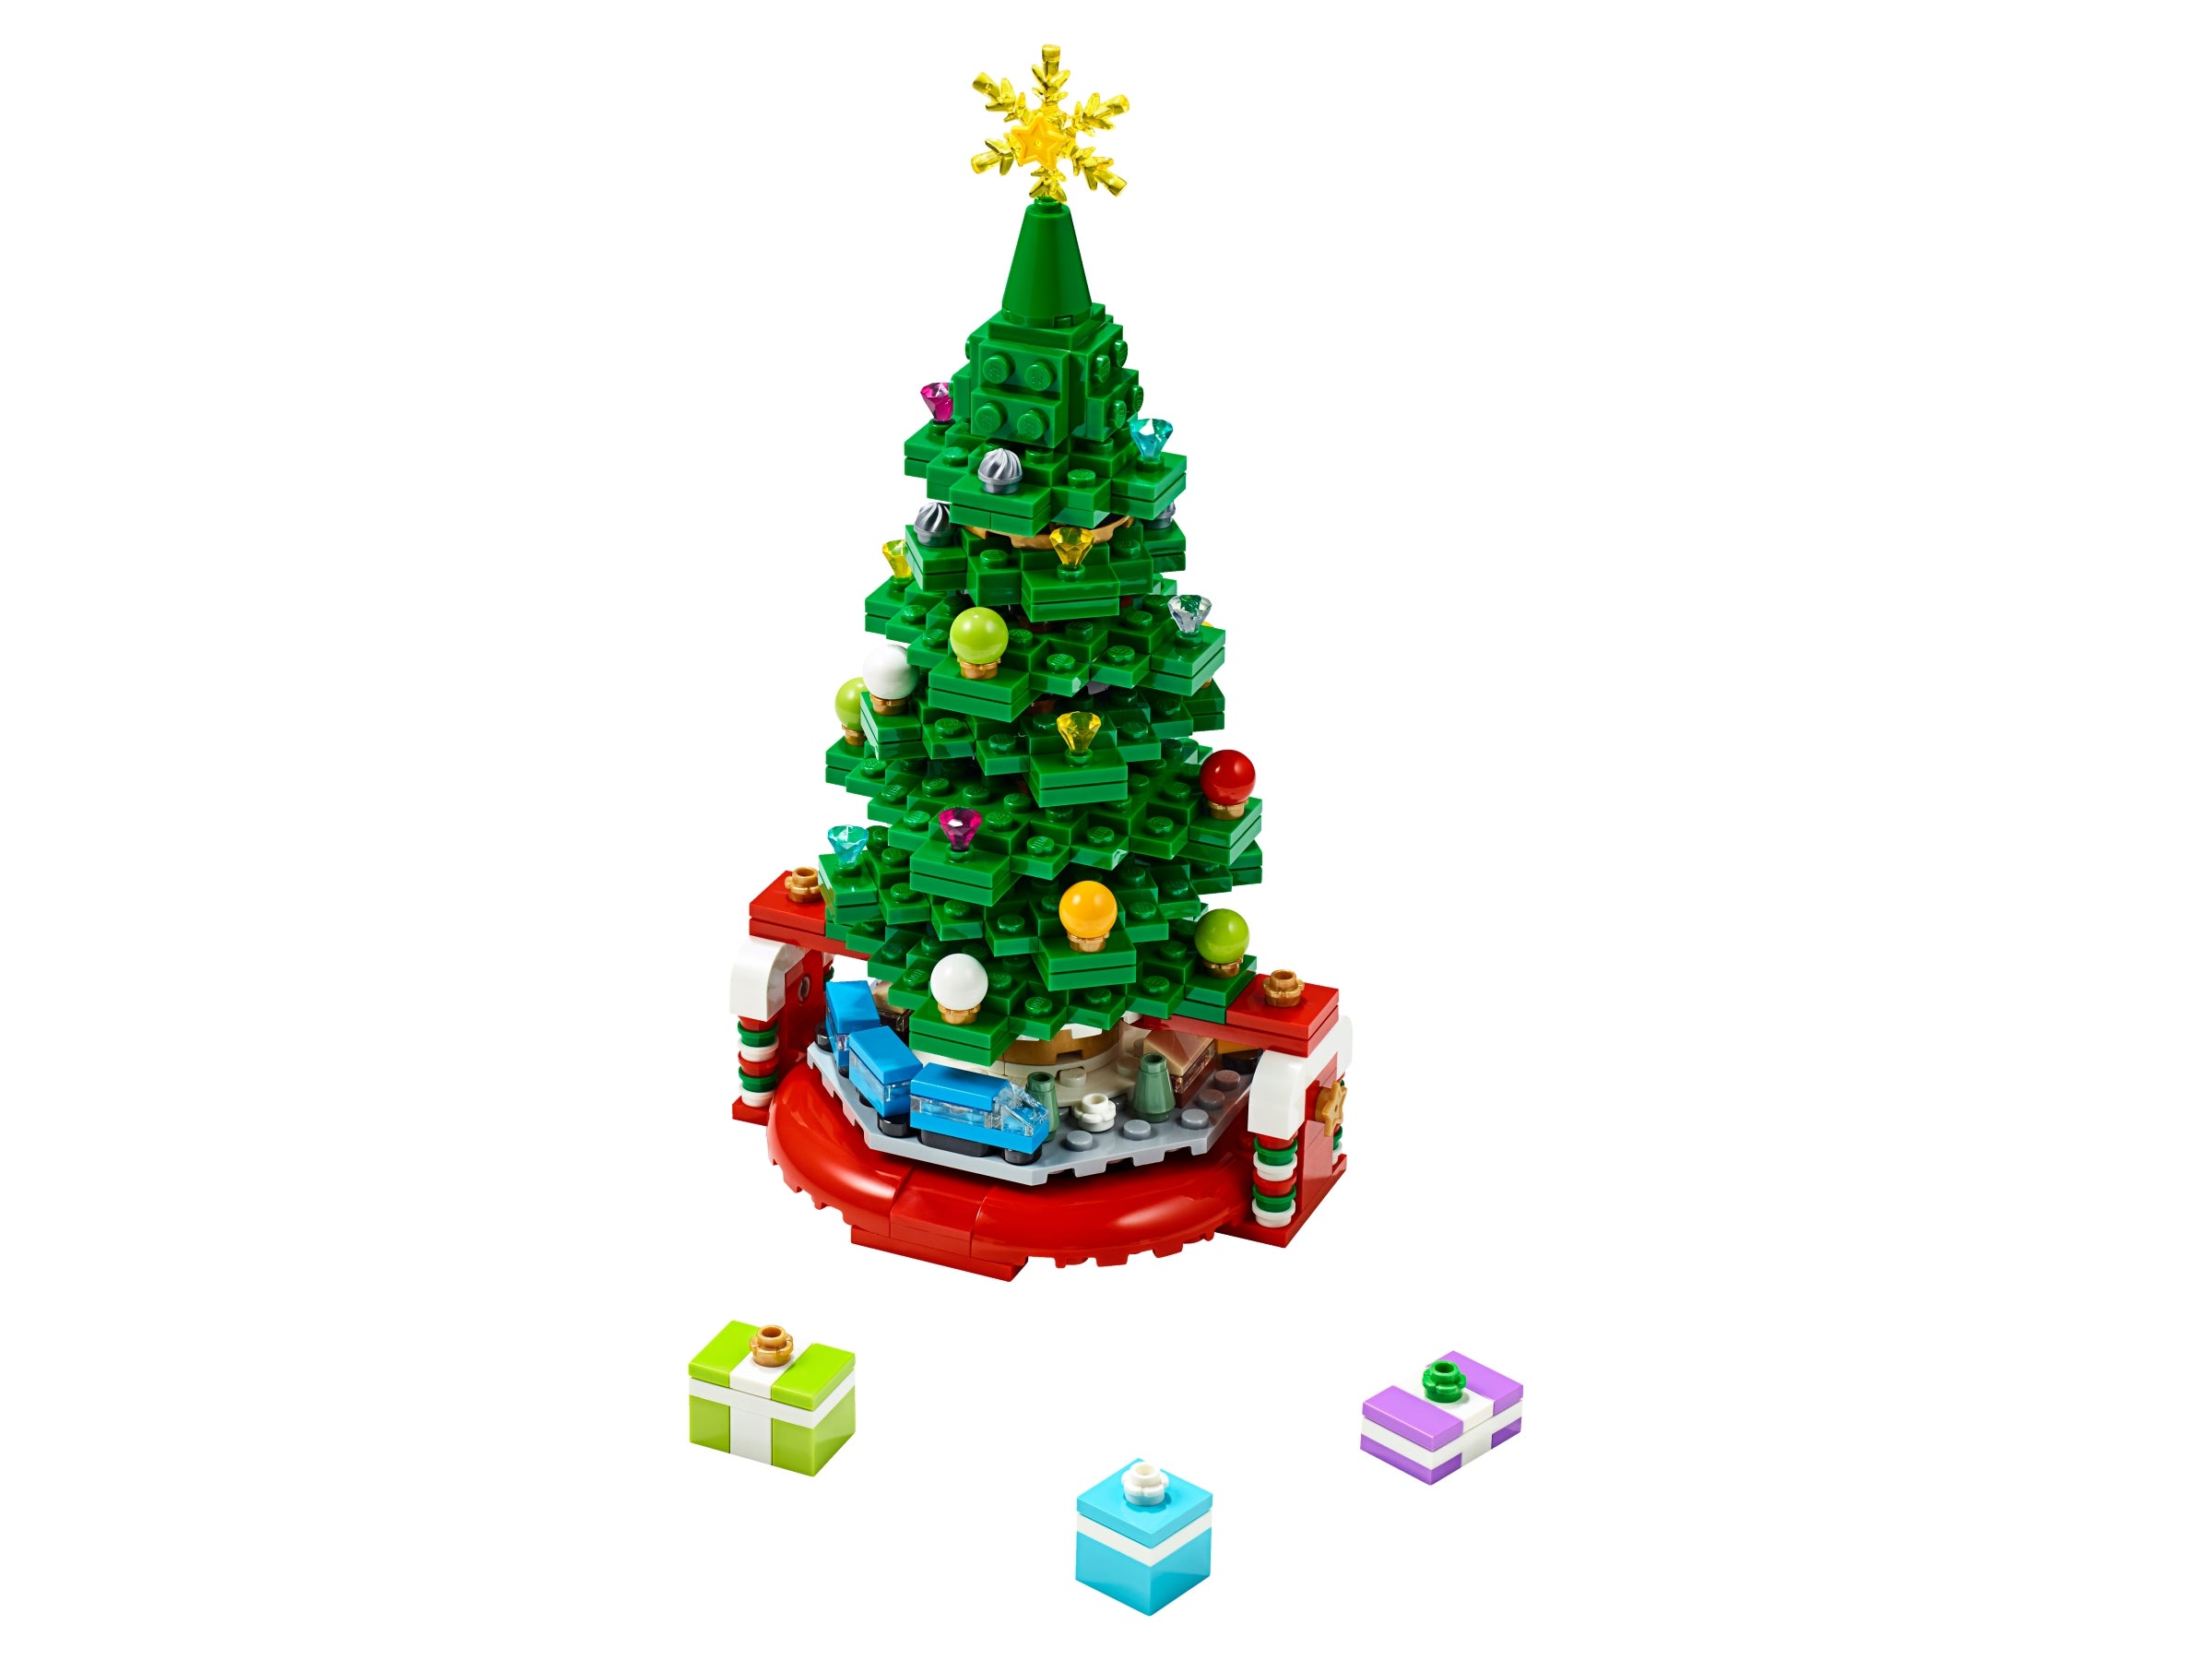 Details about    ✨2019 Lego Christmas Tree 40338 Promo ✨ Brand New Factory Sealed Box